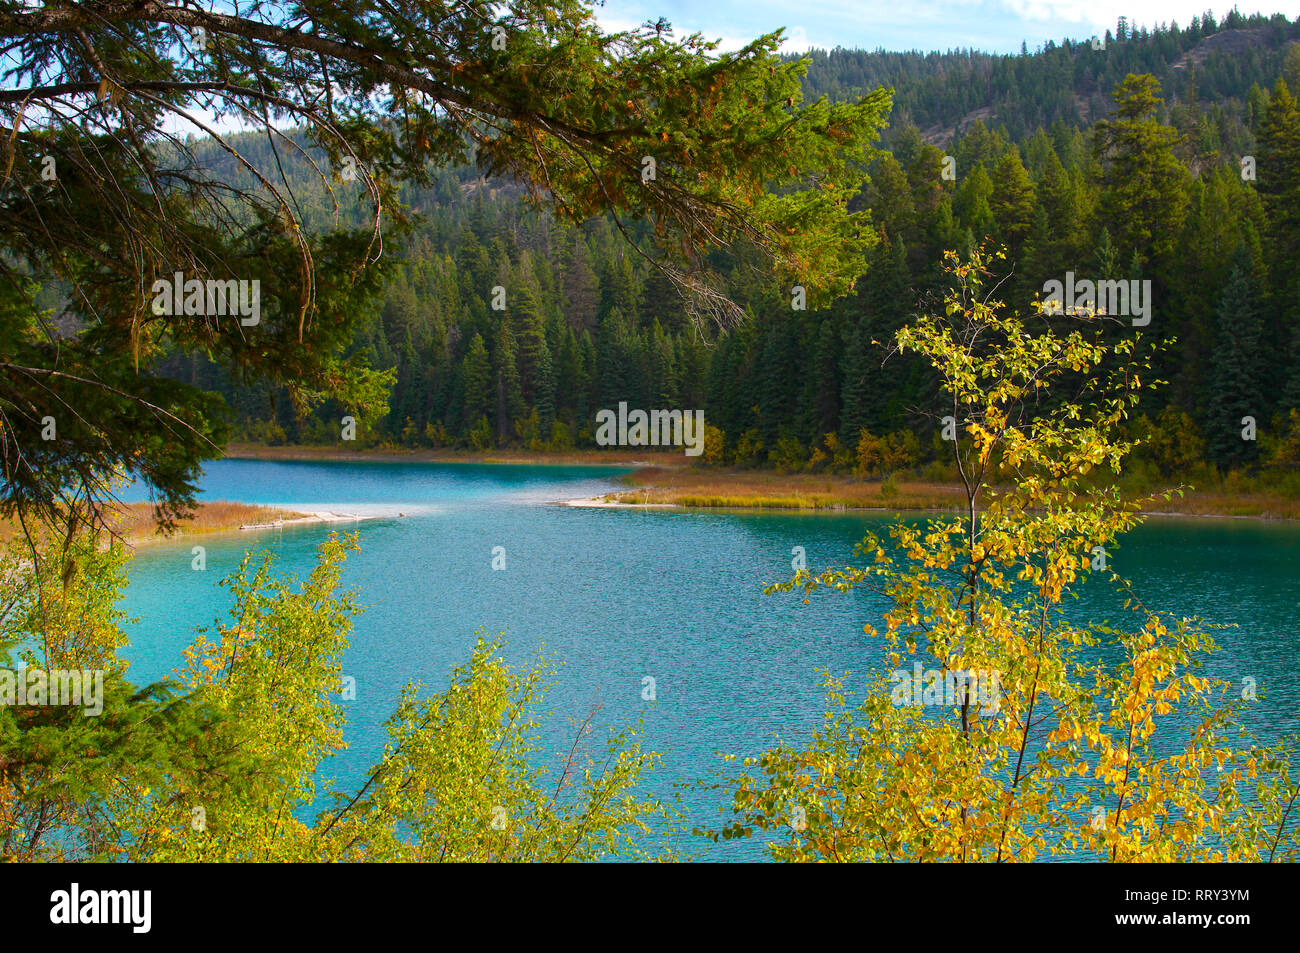 A Framed View of Kentucky Lake, British Columbia, Canada. Stock Photo